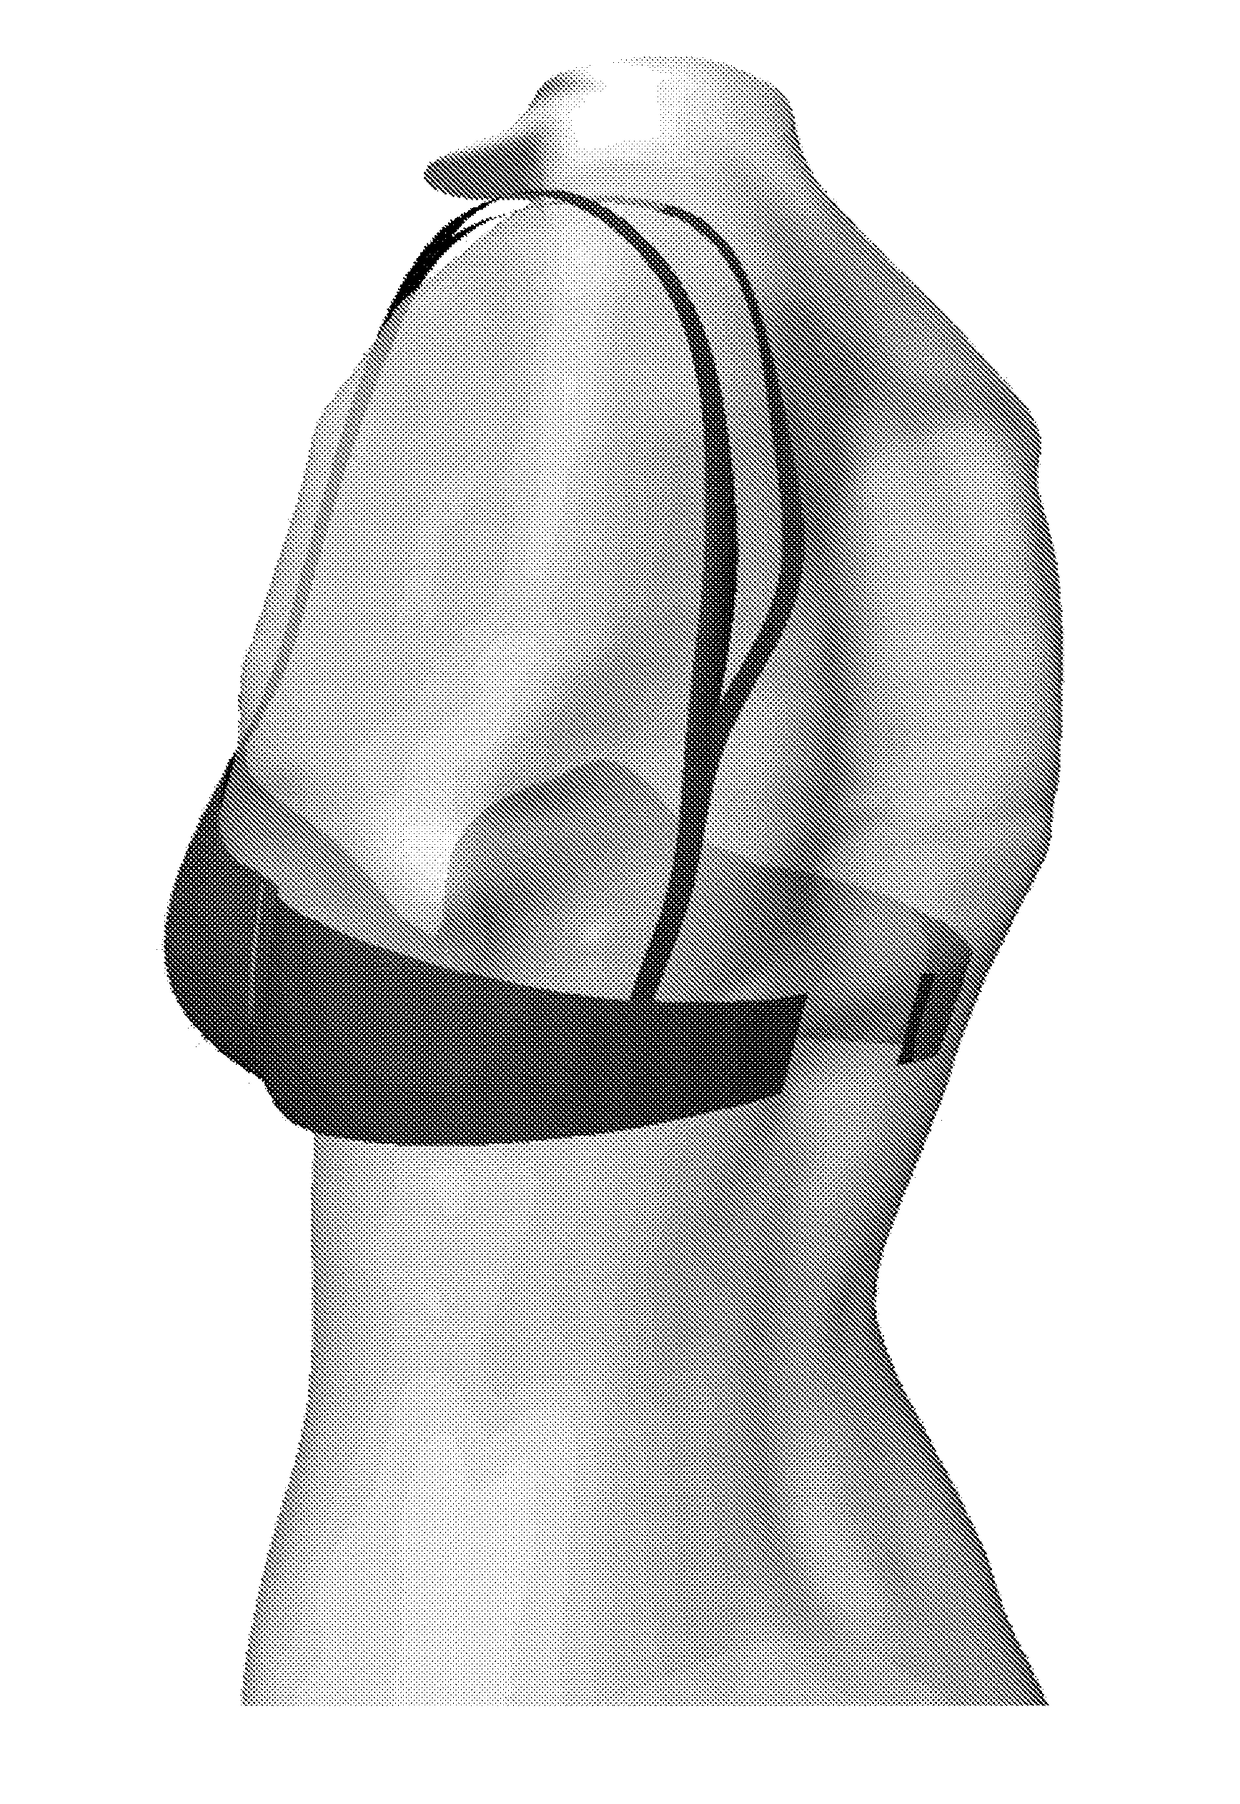 3d-printed unibody mesh structures for breast prosthesis and methods of making same